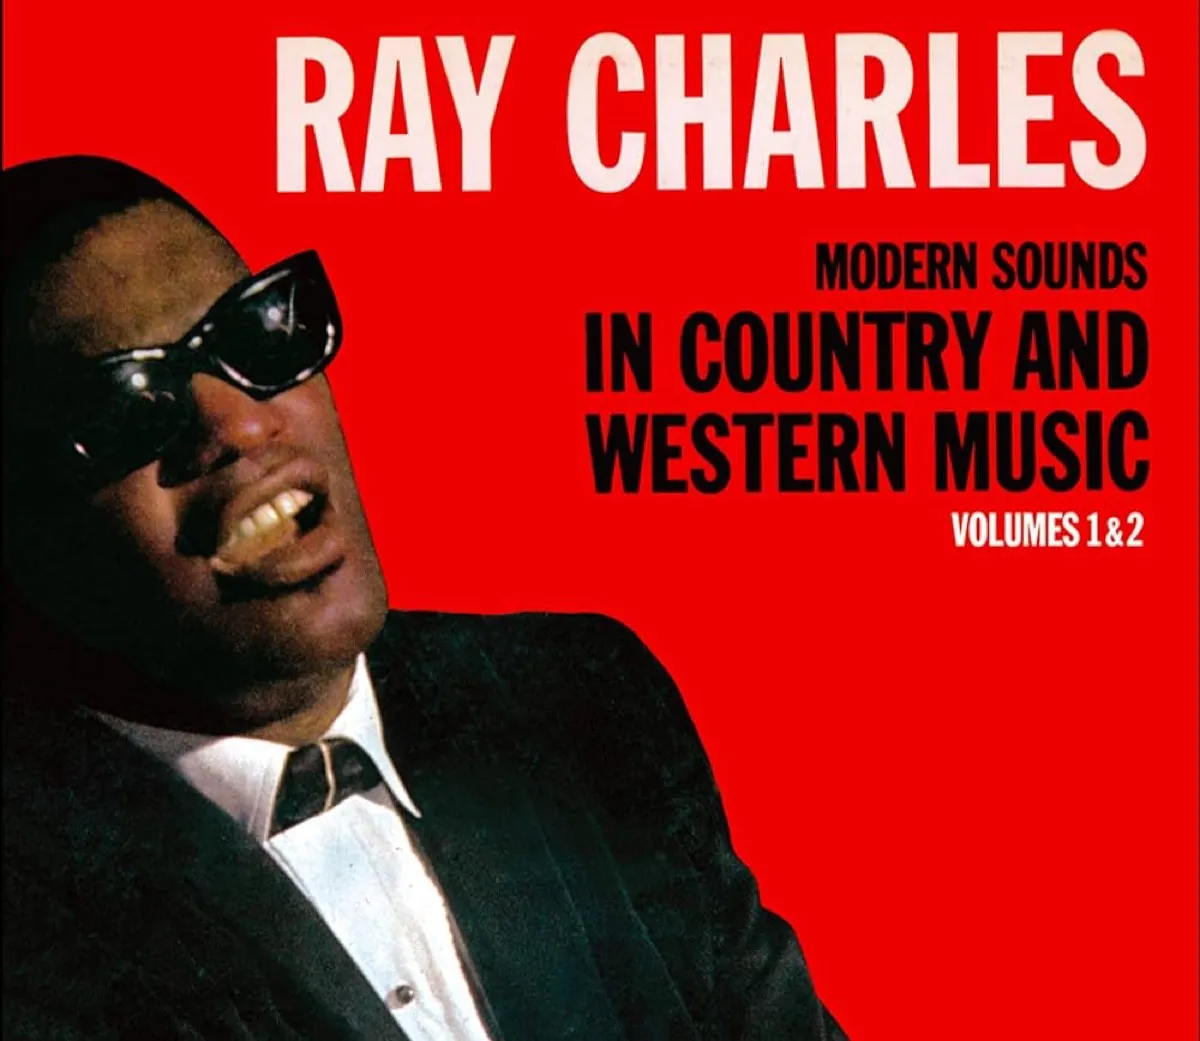 "Modern Sounds in Country and Western Music, Vols. 1 & 2" by Ray Charles album cover